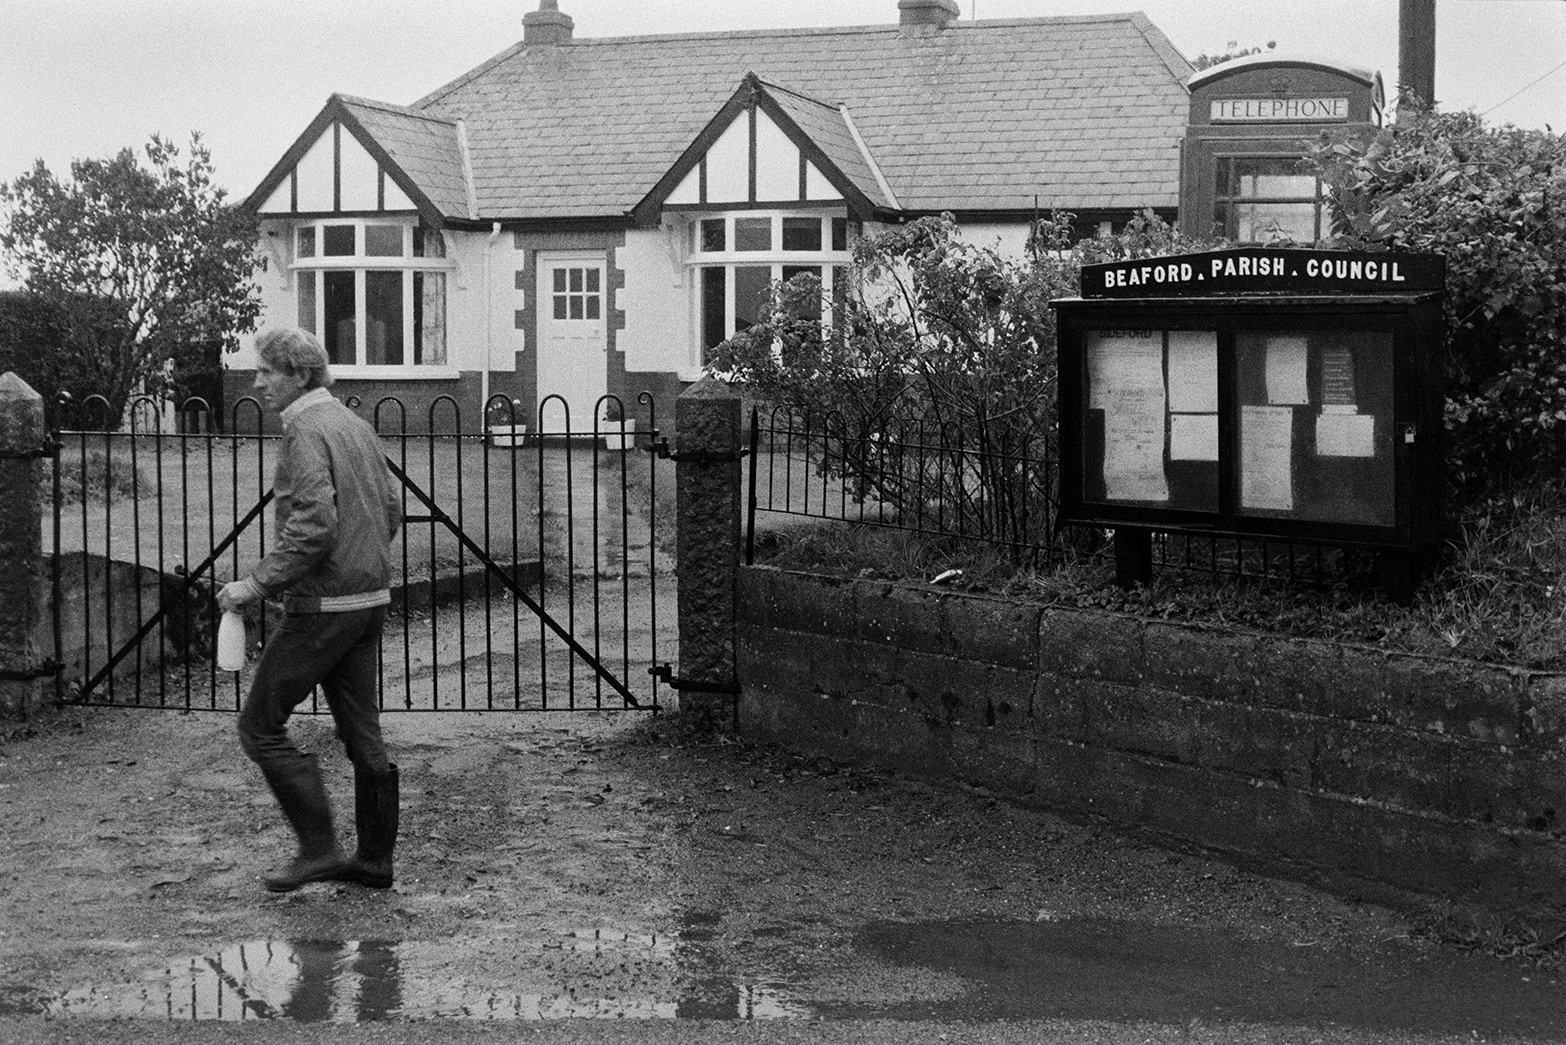 Ivor Bourne delivering milk bottles to a house in Beaford. A telephone box and Beaford Parish Council noticeboard are by the house.